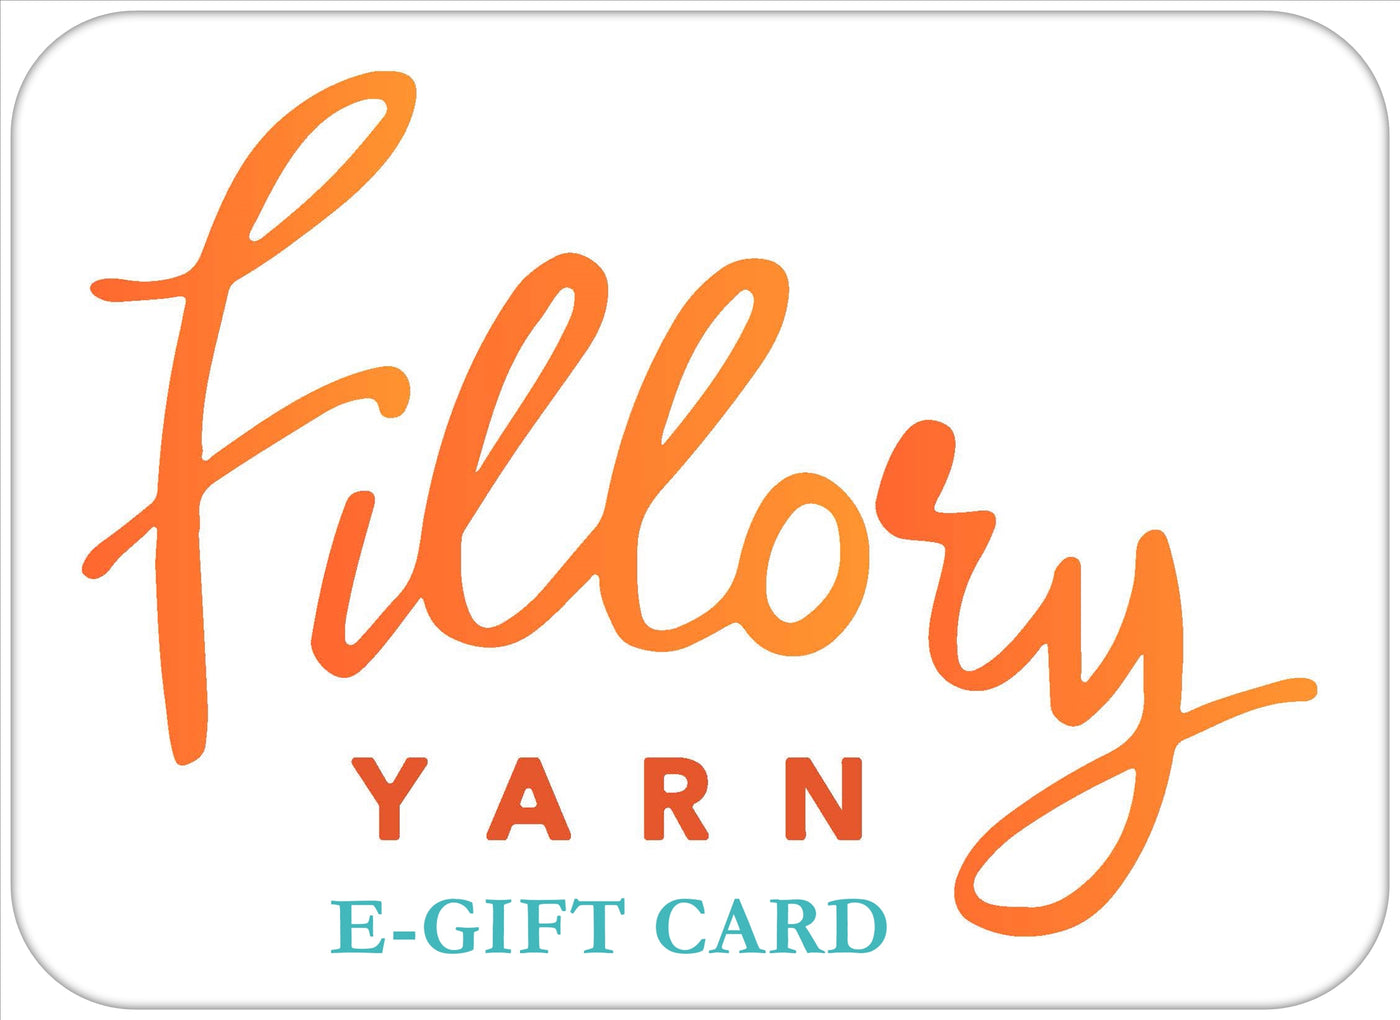 Electronic Gift Card of $500 - Fillory Yarn